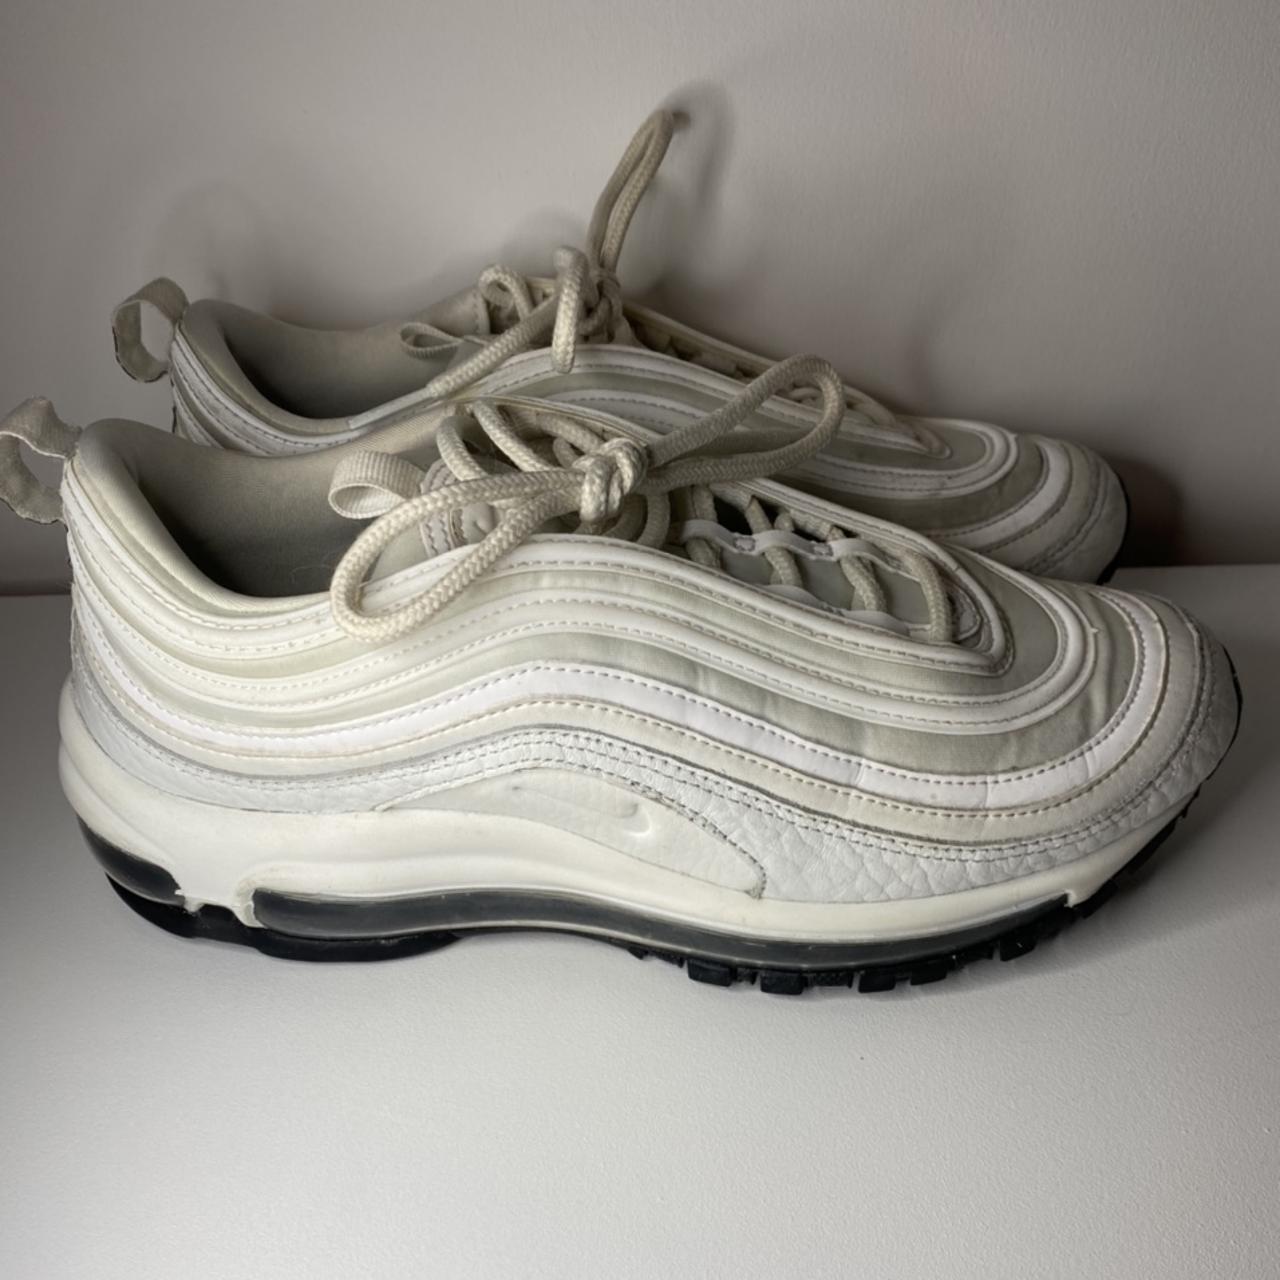 Nike Air Max triple white 97 trainers Have been worn... - Depop